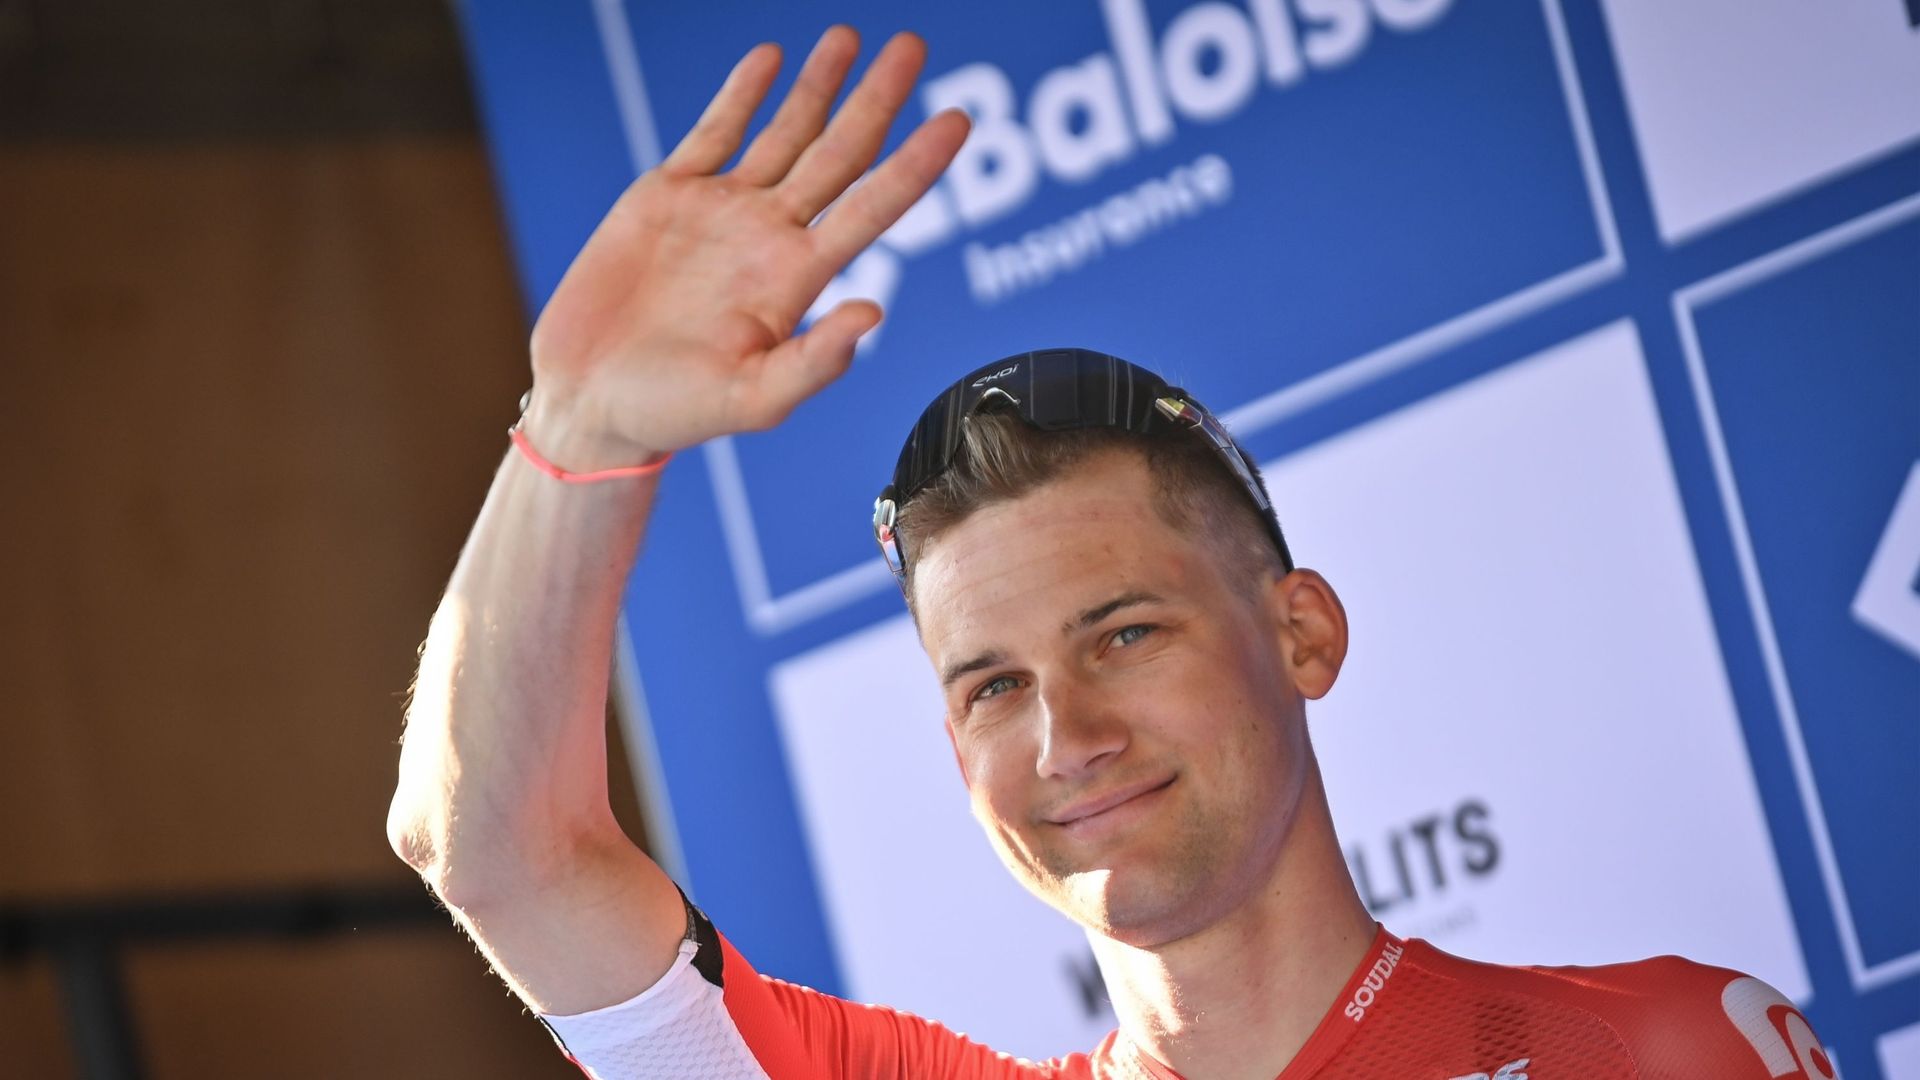 Tim Wellens quitte Lotto-Soudal.